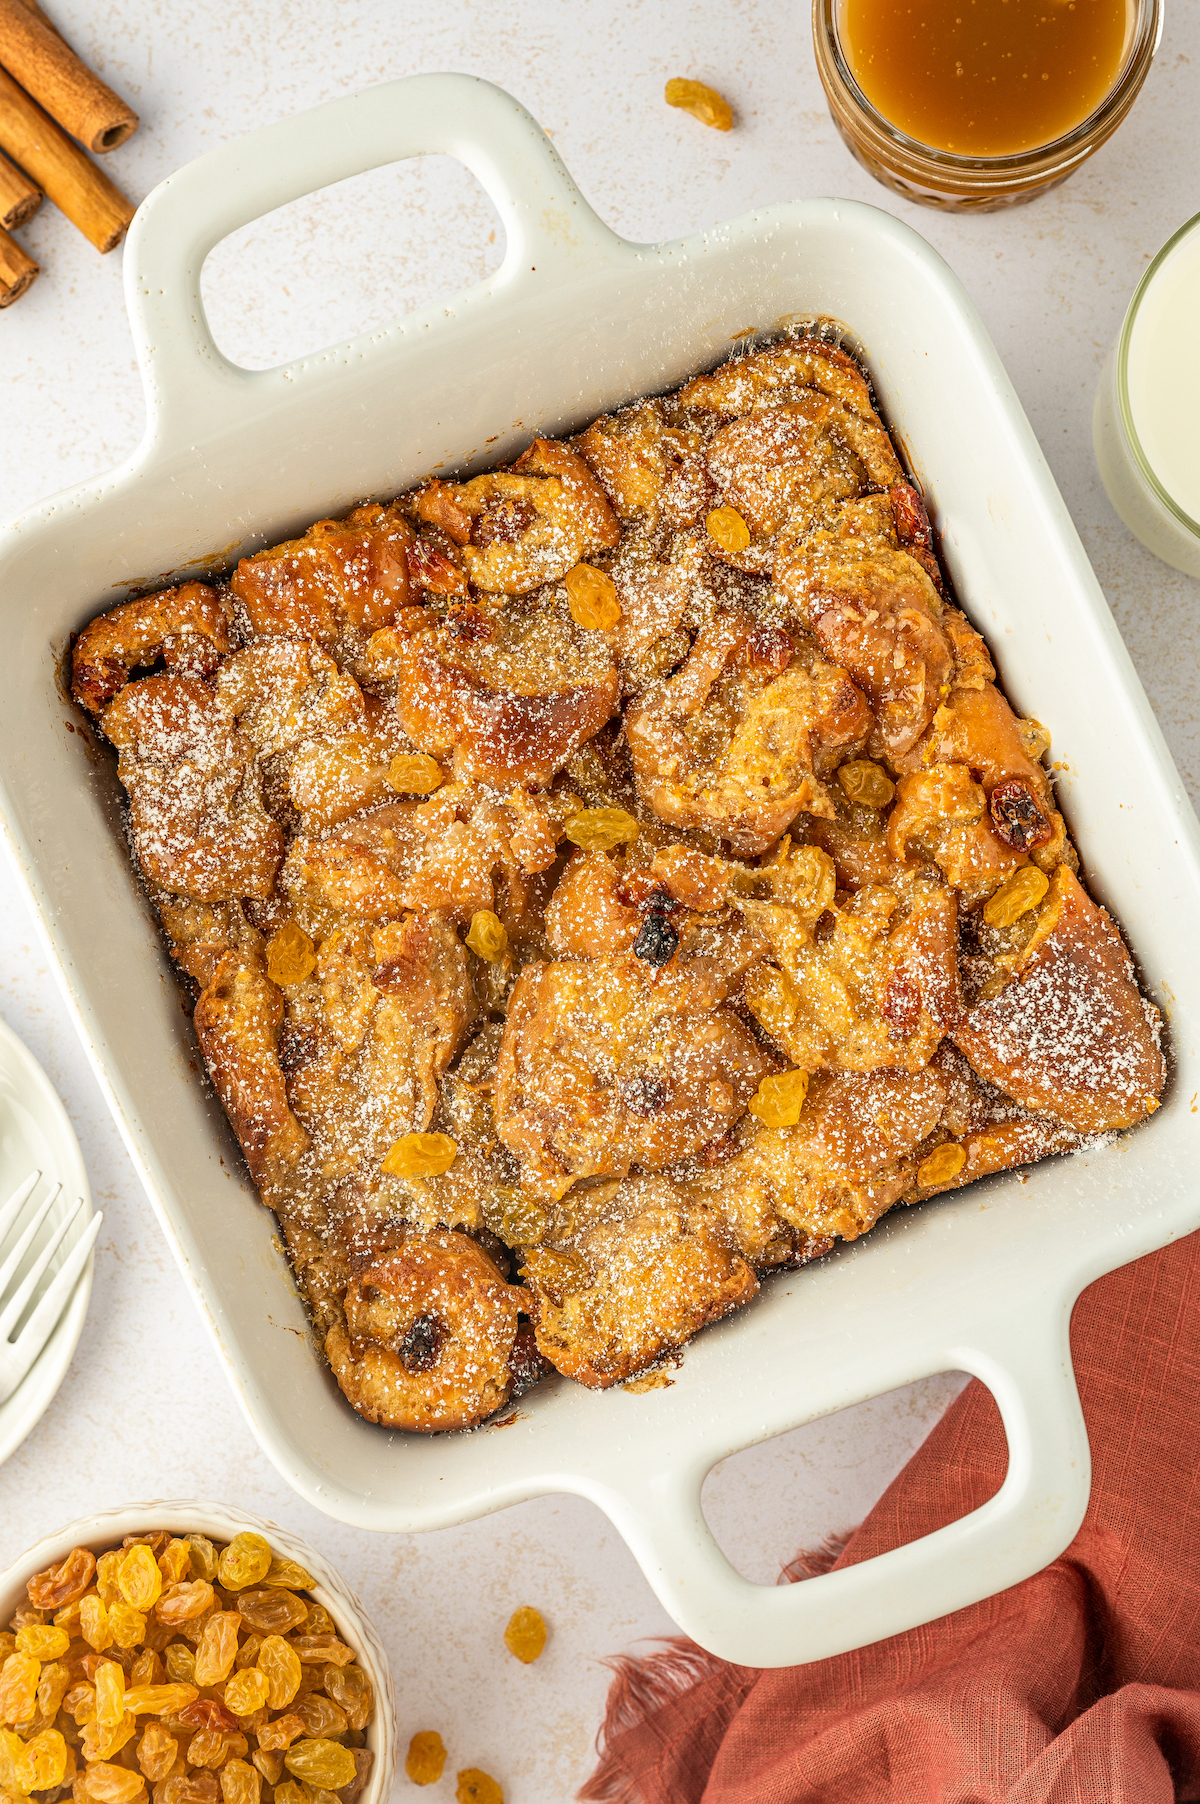 A baked pan of bread pudding made with donuts sprinkled with powdered sugar on top.